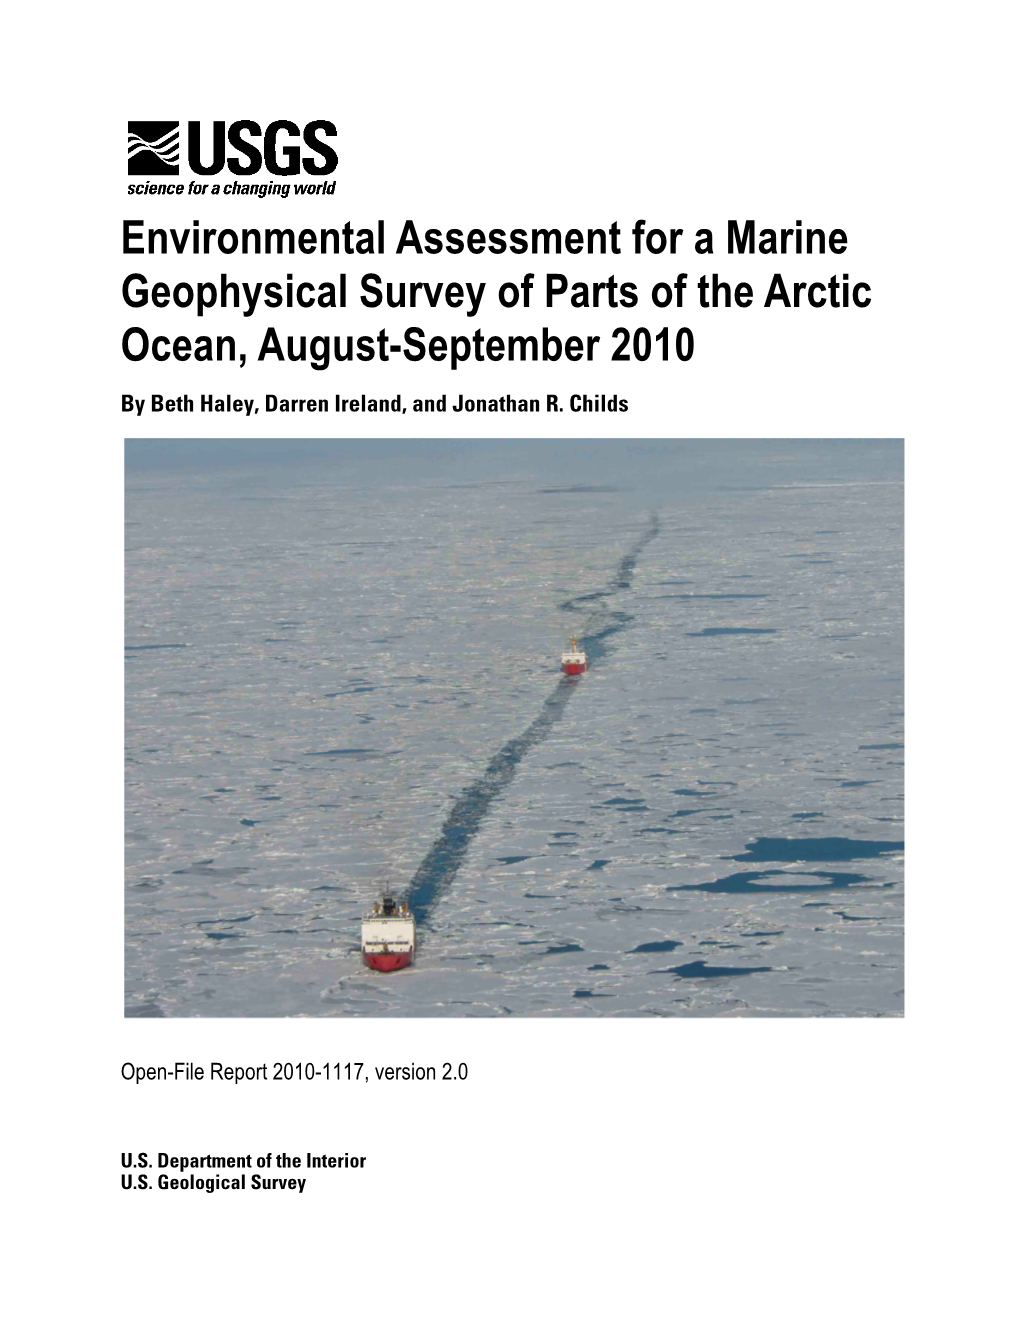 Environmental Assessment for a Marine Geophysical Survey of Parts of the Arctic Ocean, August-September 2010 by Beth Haley, Darren Ireland, and Jonathan R